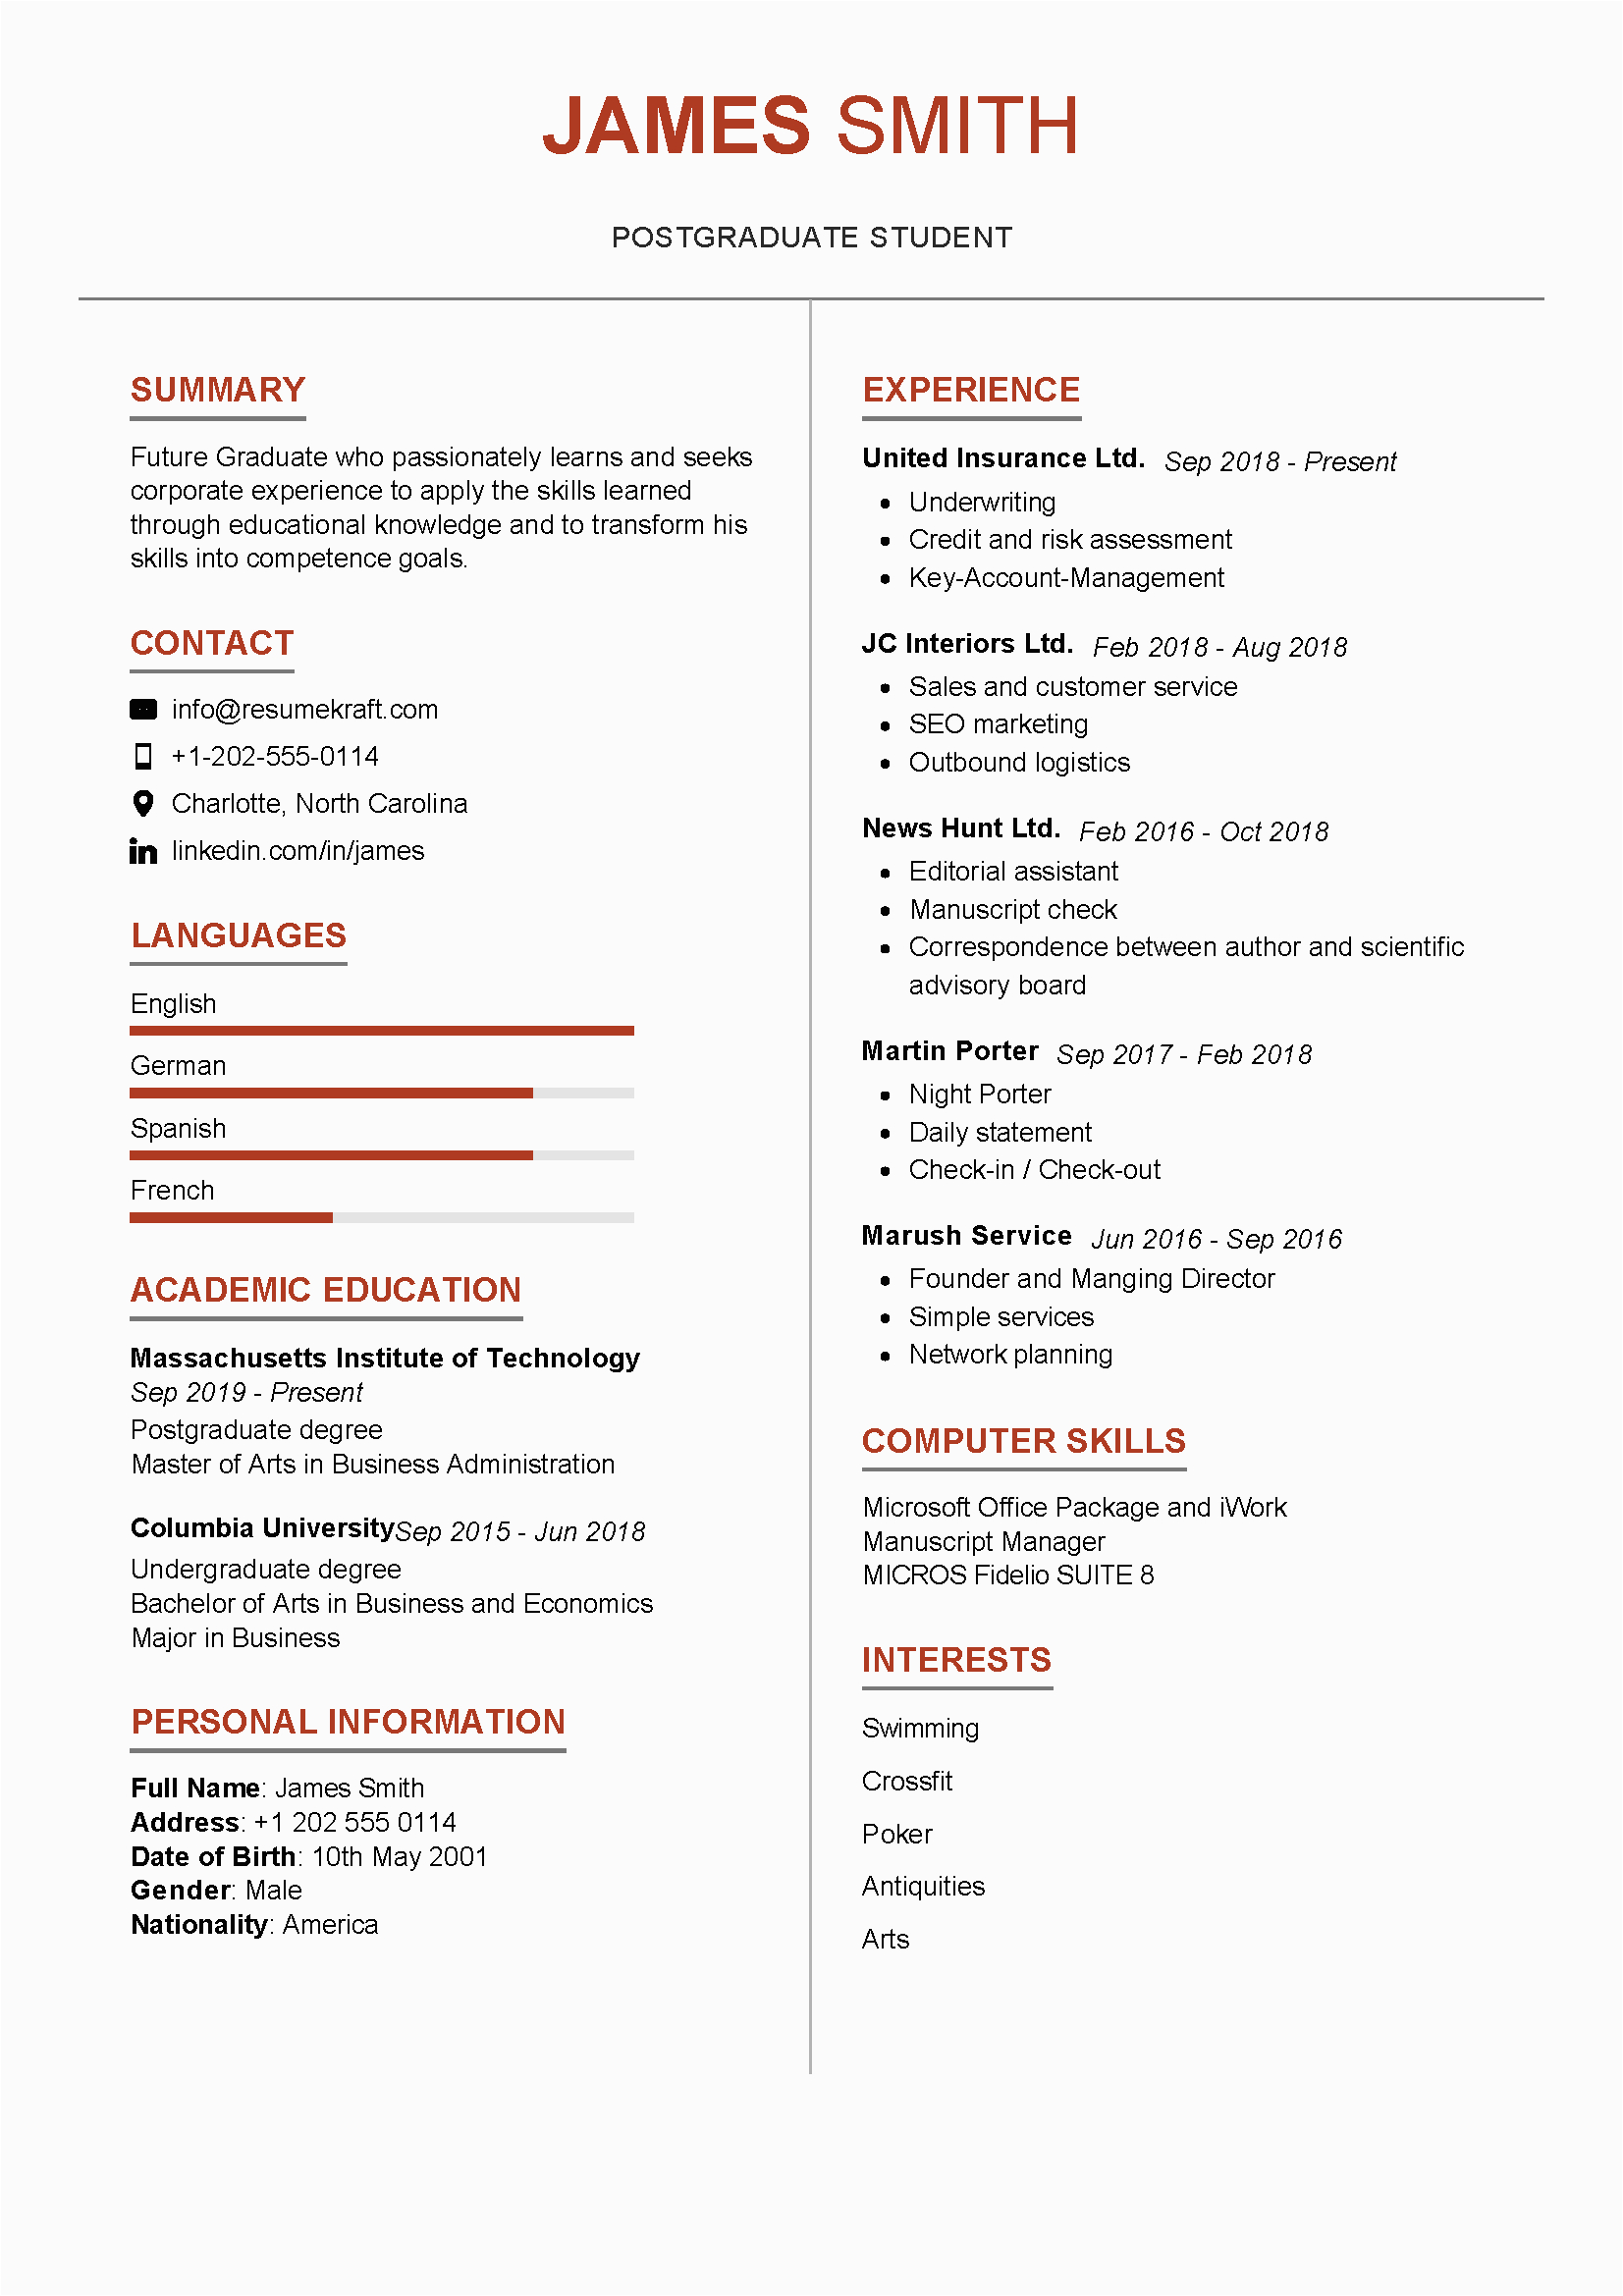 Sample Resume for Newly Graduated Student Graduate Student Resume Sample